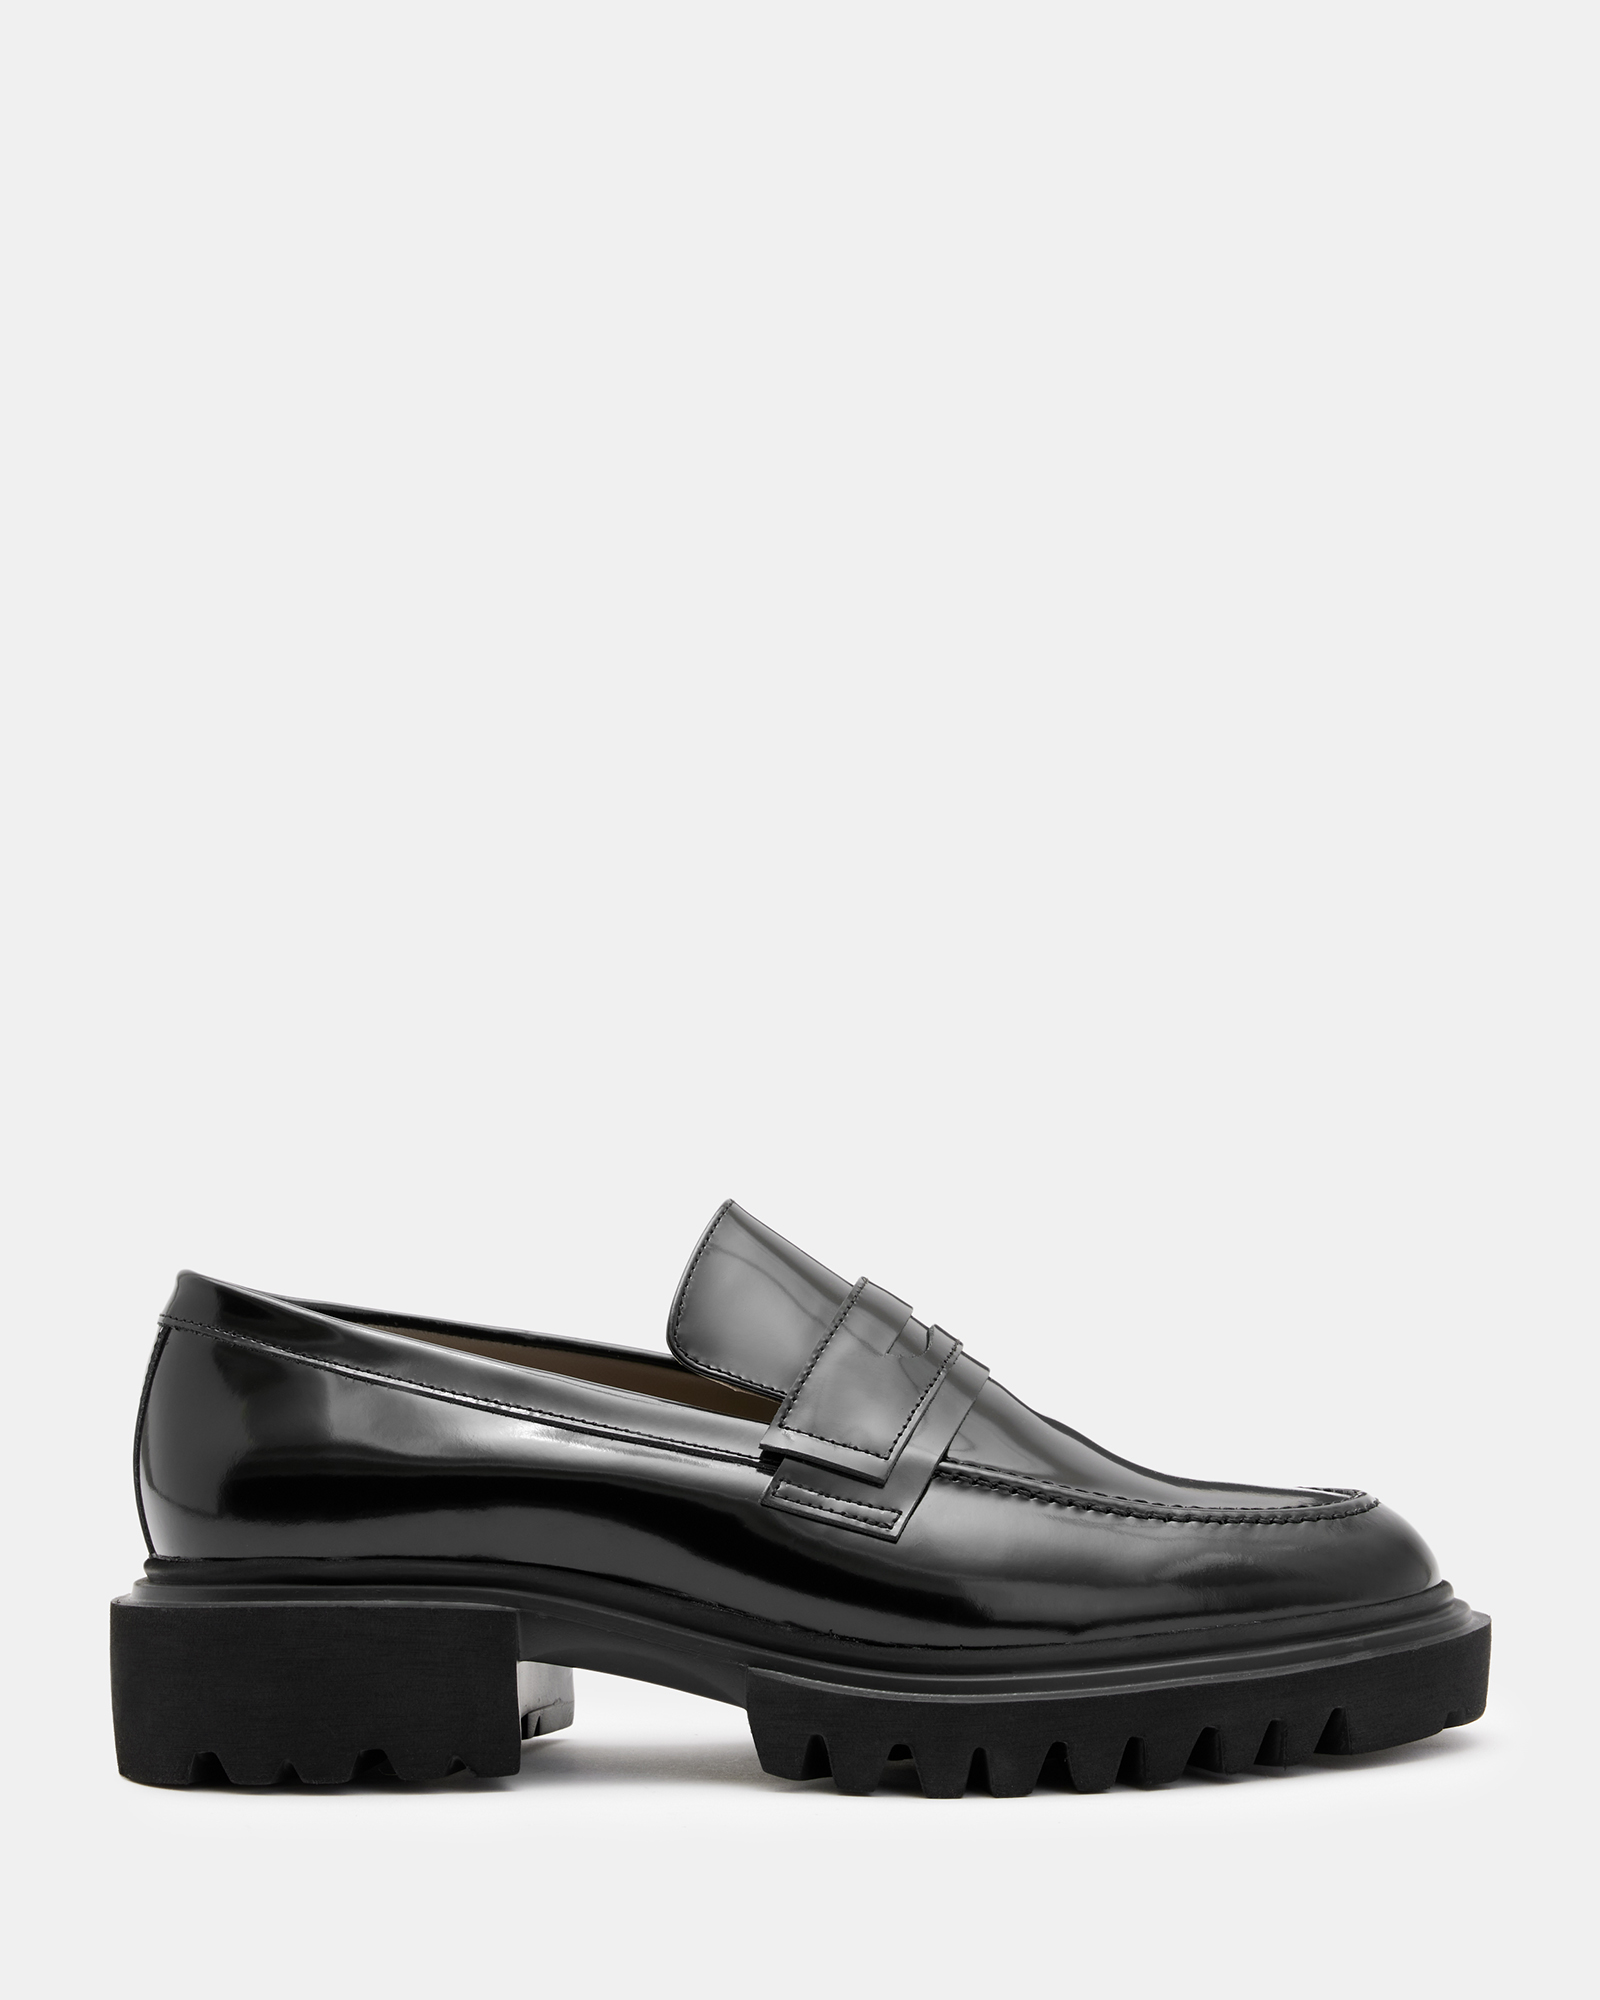 Vinni Chunky Leather Loafer Shoes Black | ALLSAINTS